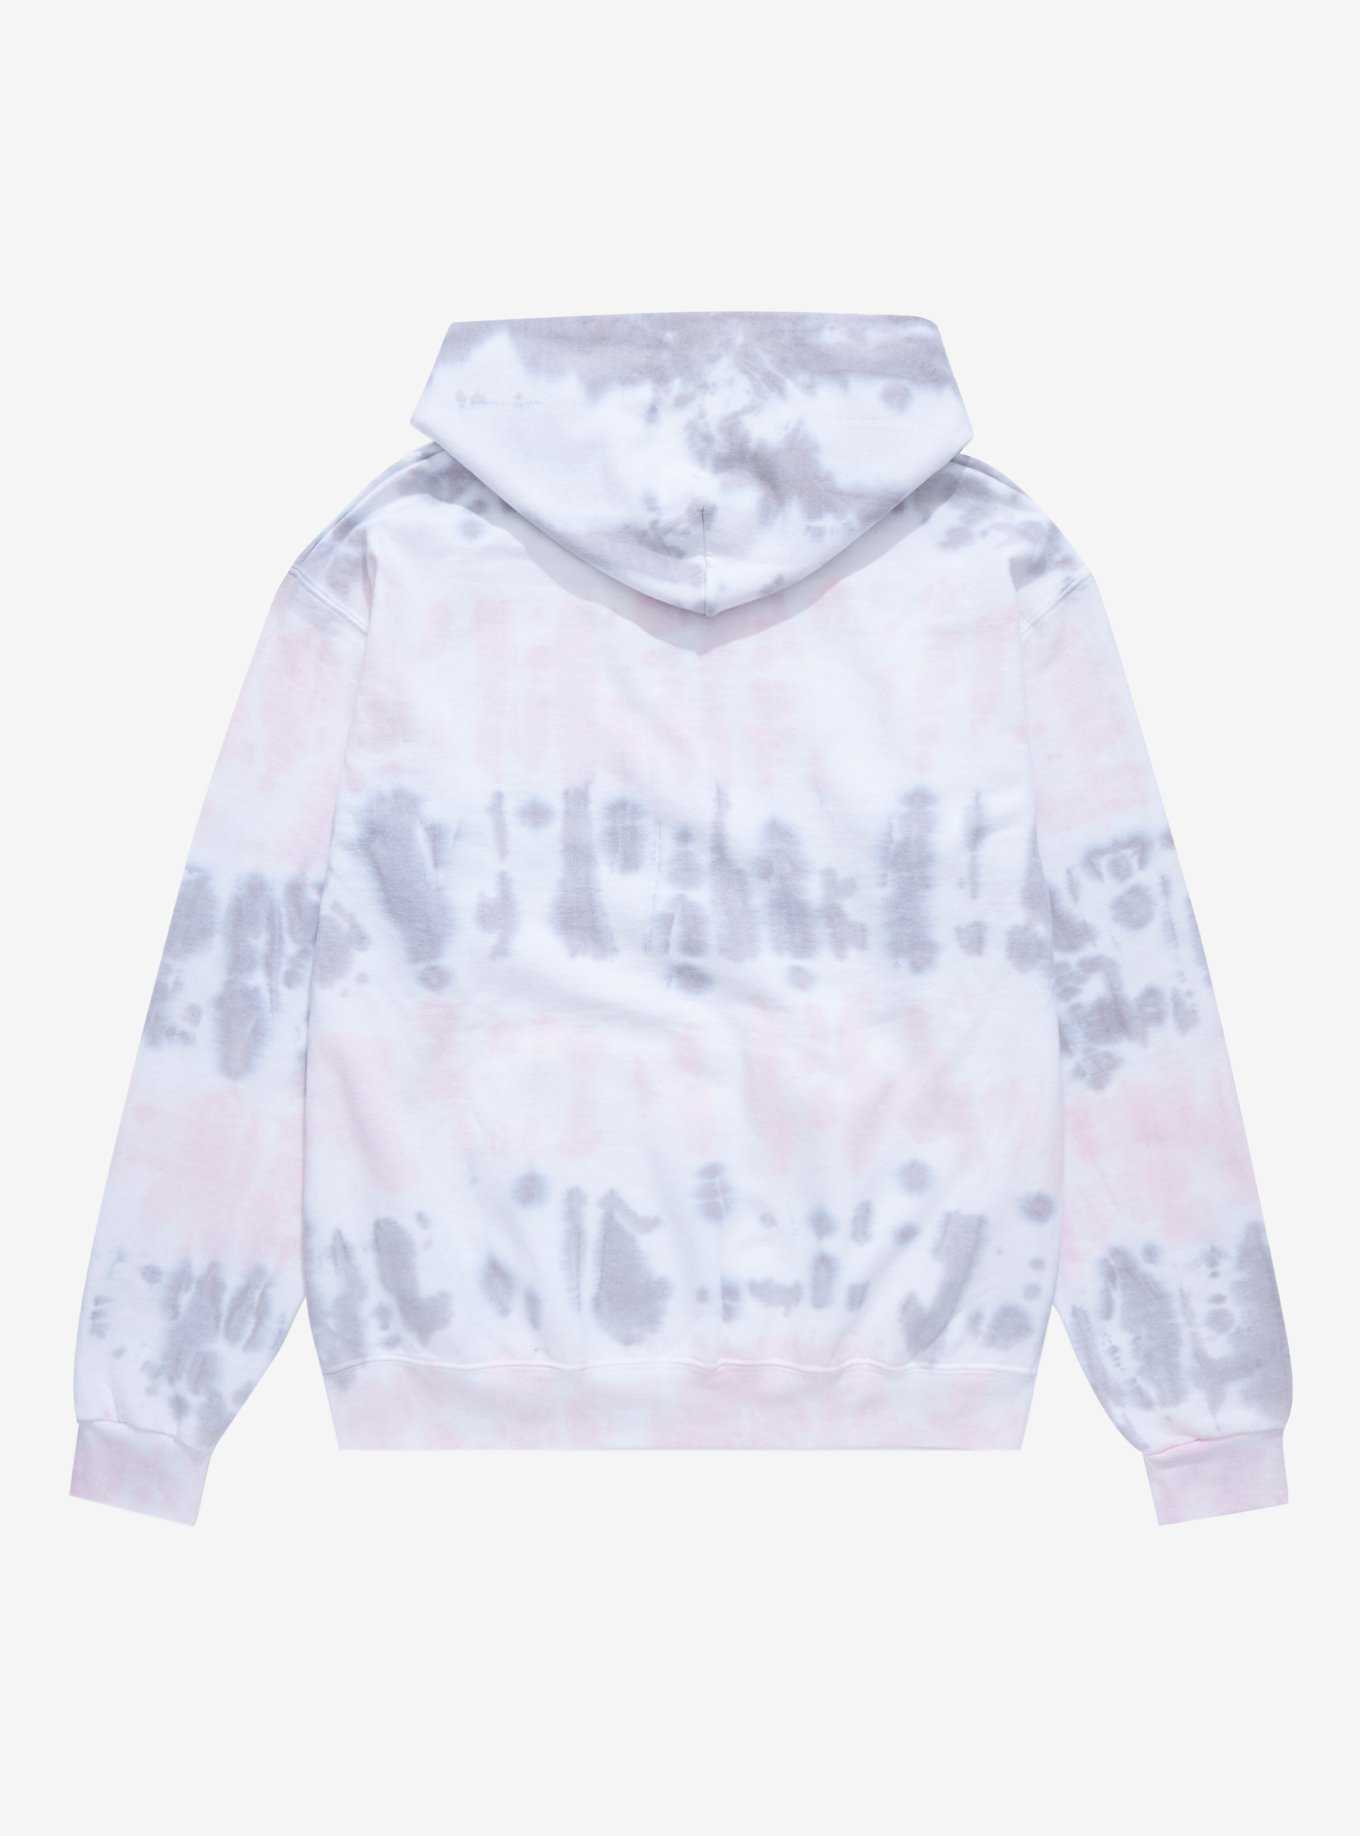 Sanrio Hello Kitty and Friends x Attack on Titan Tie-Dye Hoodie - BoxLunch Exclusive, , hi-res